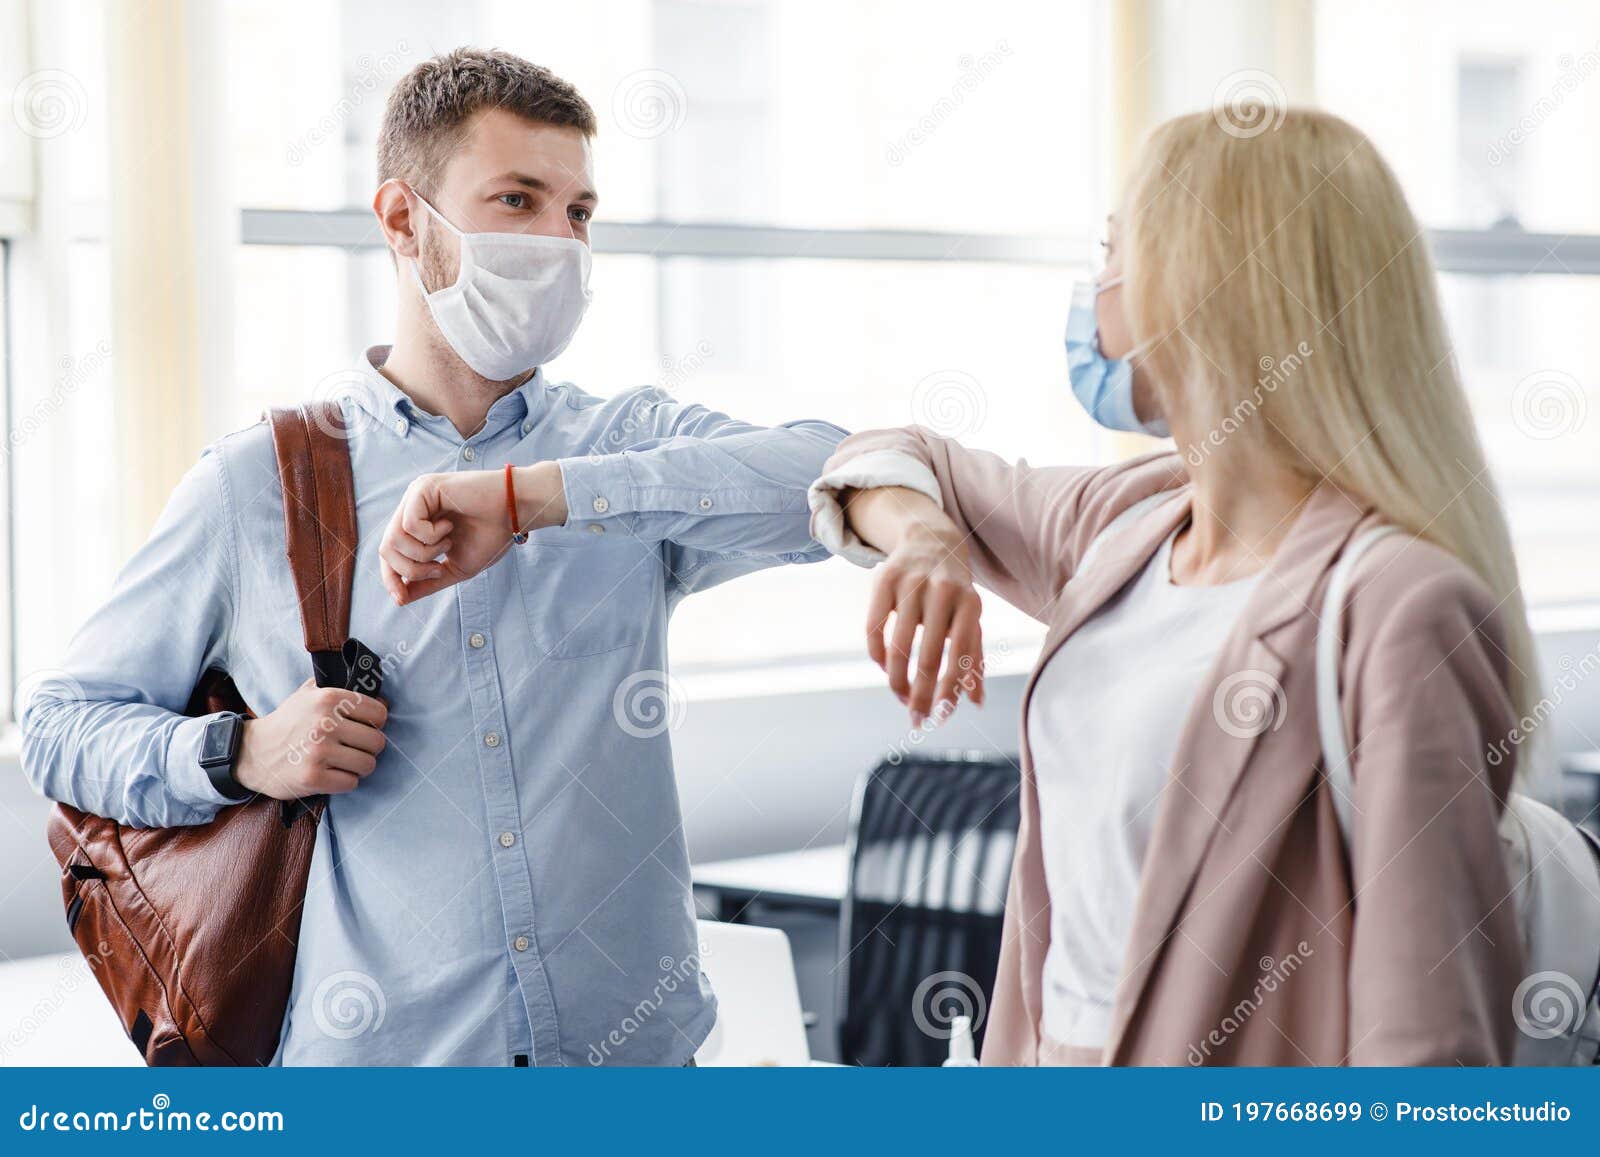 say hello, social distance and return to work after quarantine. millennial man and woman in protective masks are touched